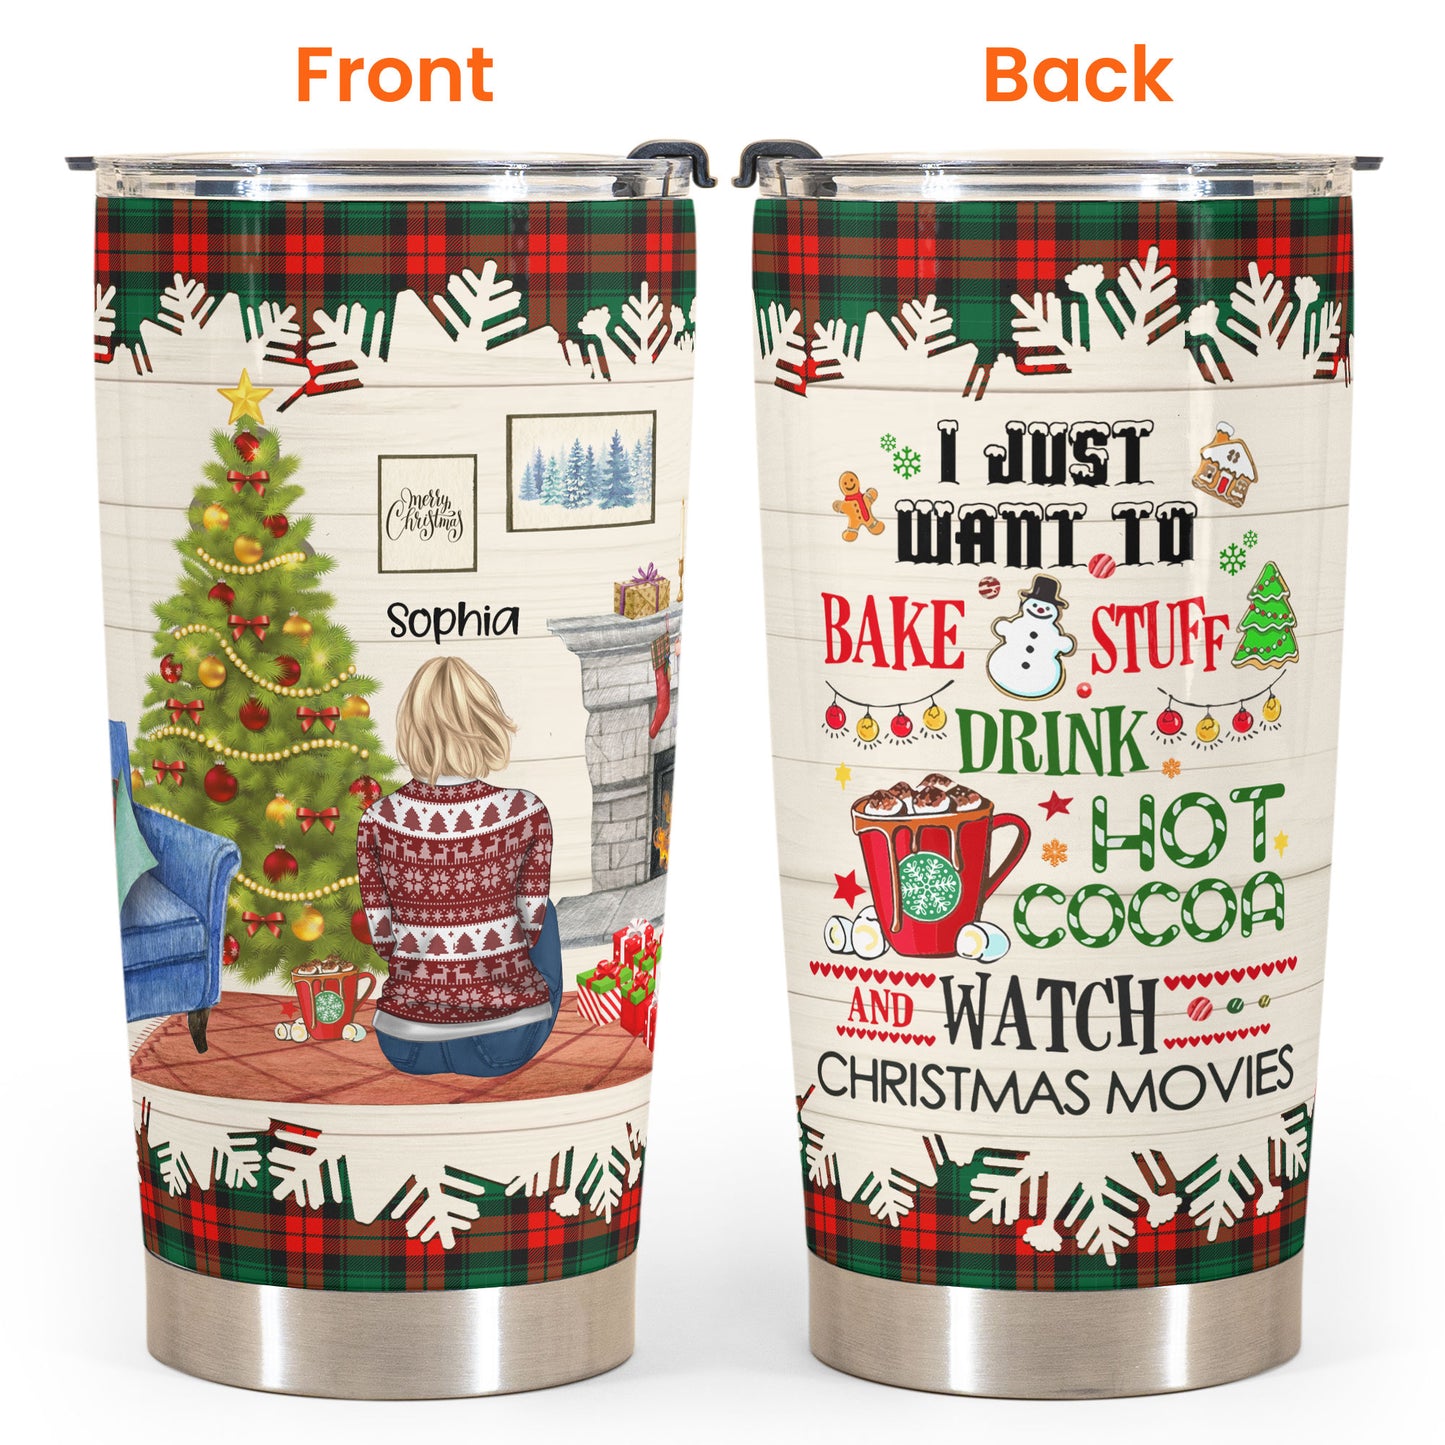 https://macorner.co/cdn/shop/products/Bake-Stuff-And-Drink-Cocao-Personalized-Tumbler-Cup-Christmas-Gift-For-Family-_-Relationship-Chrismas-Girls-04.jpg?v=1632891617&width=1445